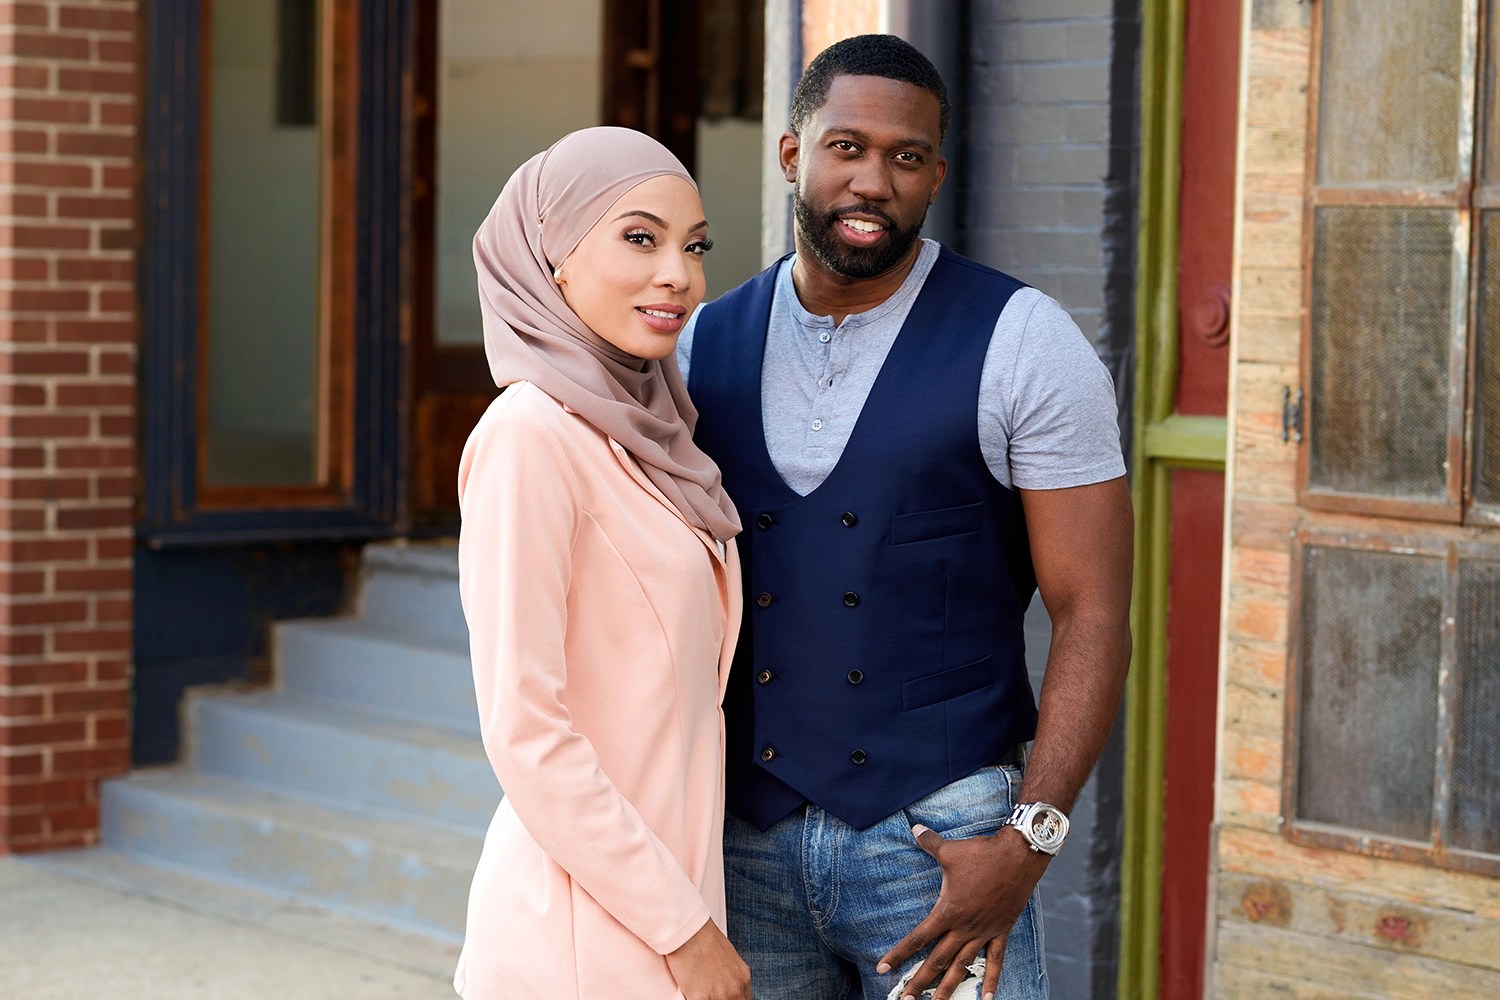 '90 Day Fiancé' Season 9 couple, Shaeeda Sween and Bilal Hazziez, posing together in Kansas City, MO for TLC.